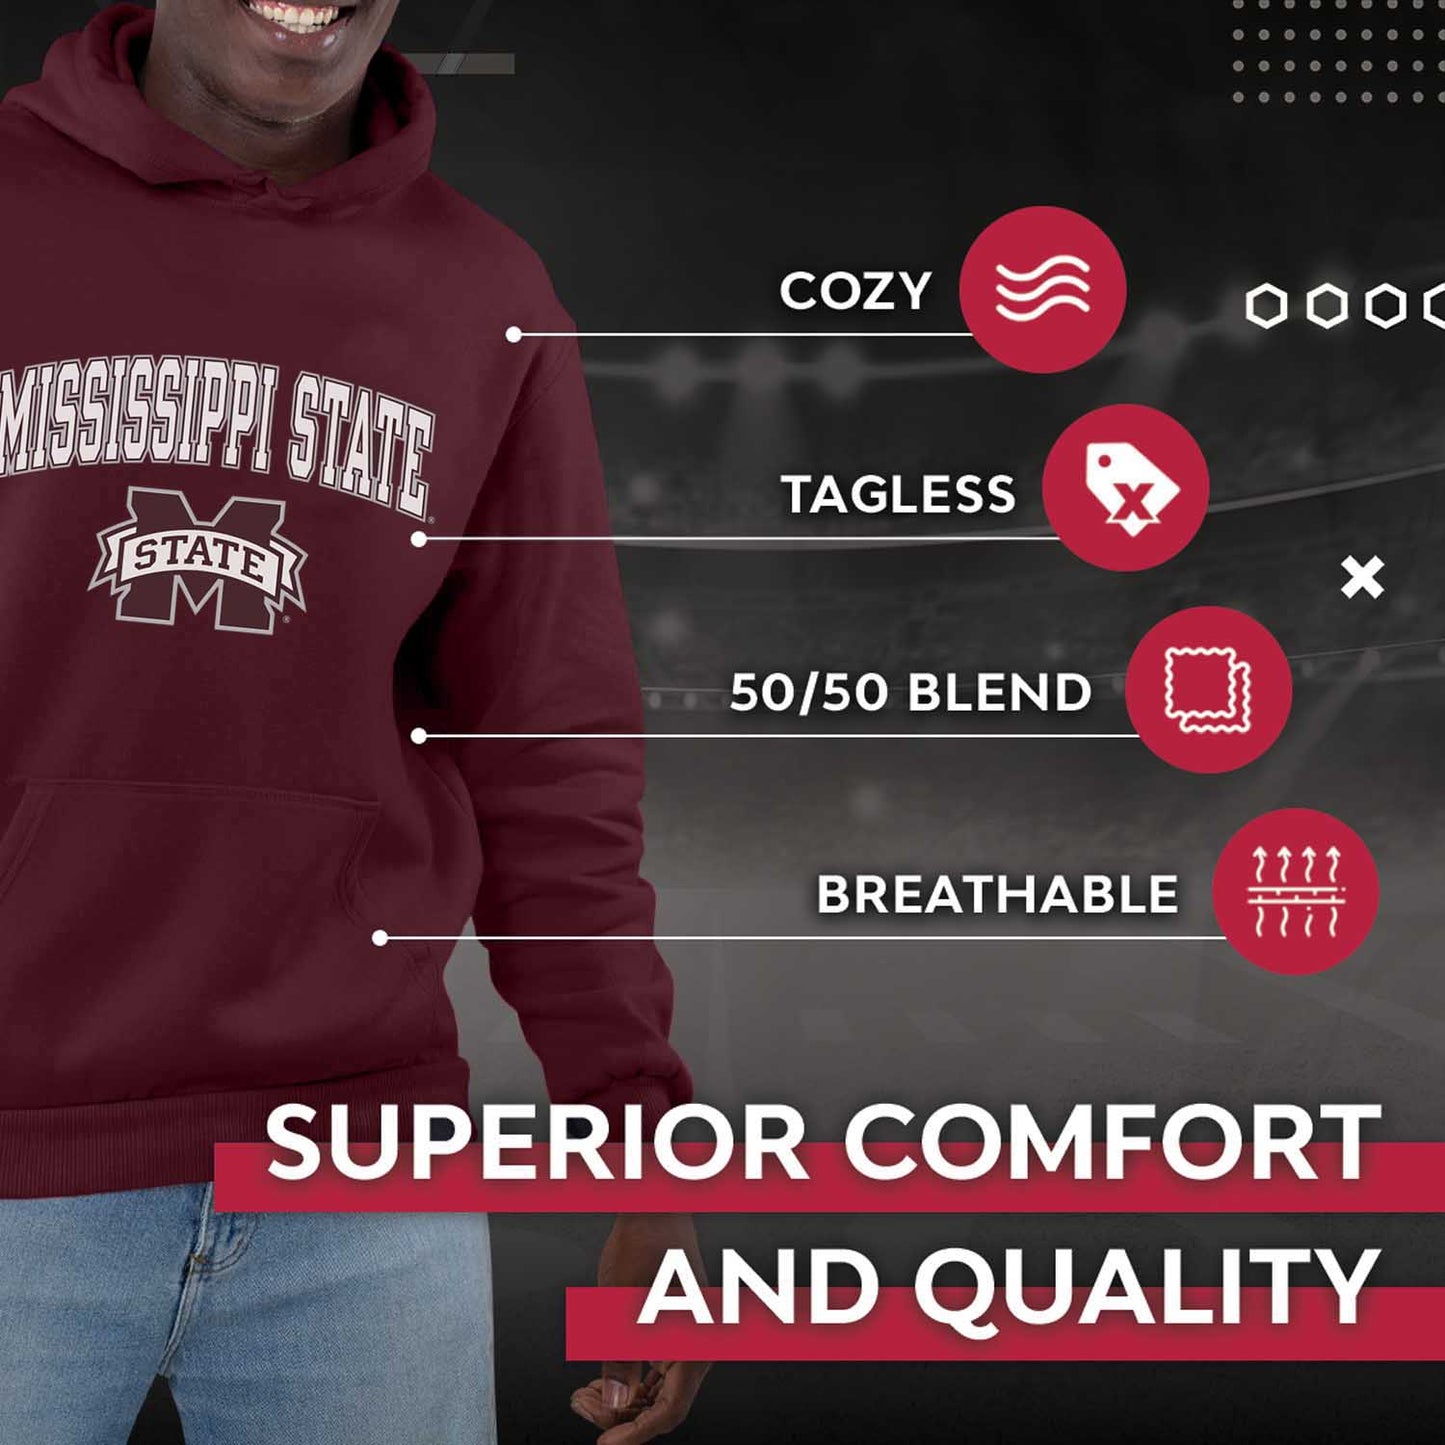 Mississippi State Bulldogs Adult Arch & Logo Soft Style Gameday Hooded Sweatshirt - Team Color